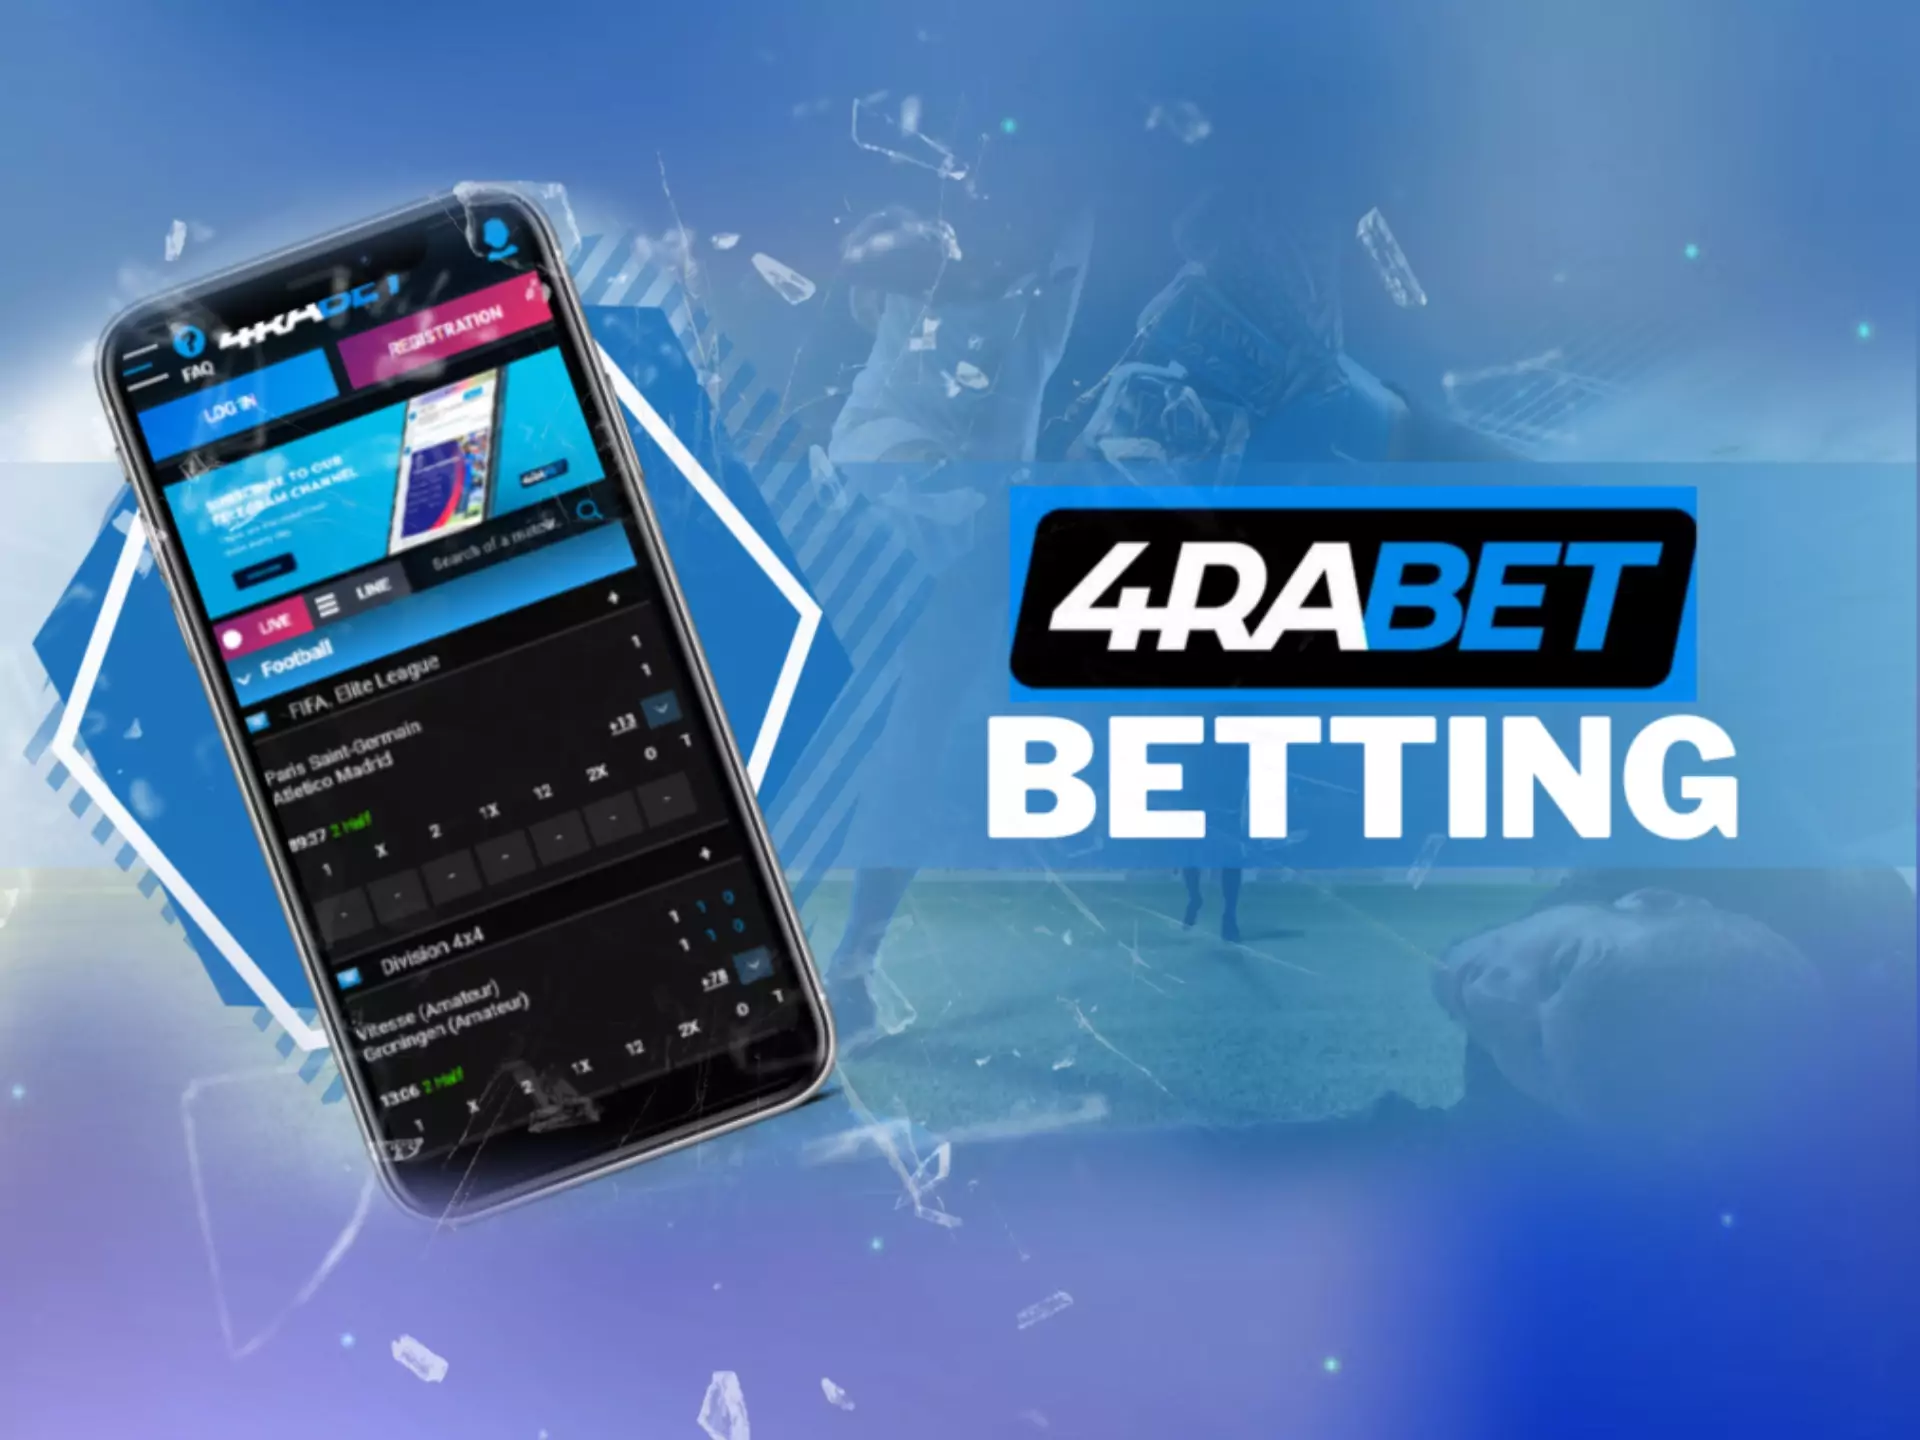 You have to register and make a deposit to place bets at 4rabet.